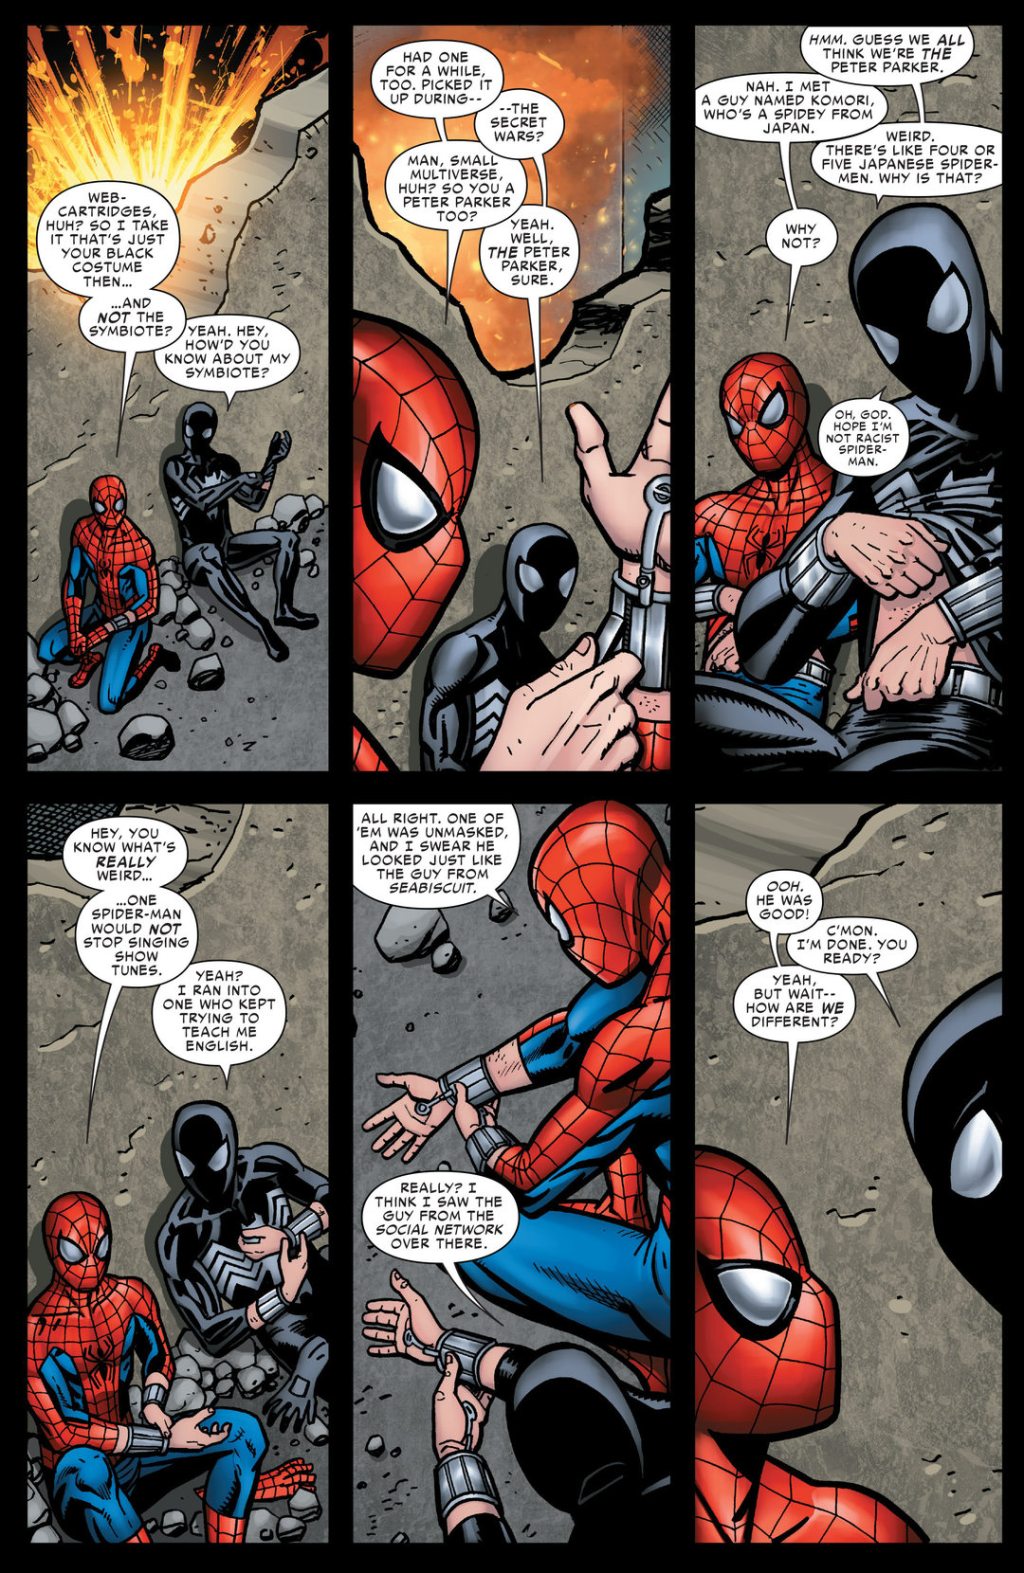 Two familiar versions of Peter Parker take a moment to reload in  Spider-Verse Vol. 1 #2 “It’s The Little Things” (2015), Marvel Comics. Words by Dan Slott, Art by Ty Templeton and Paco Herrera.